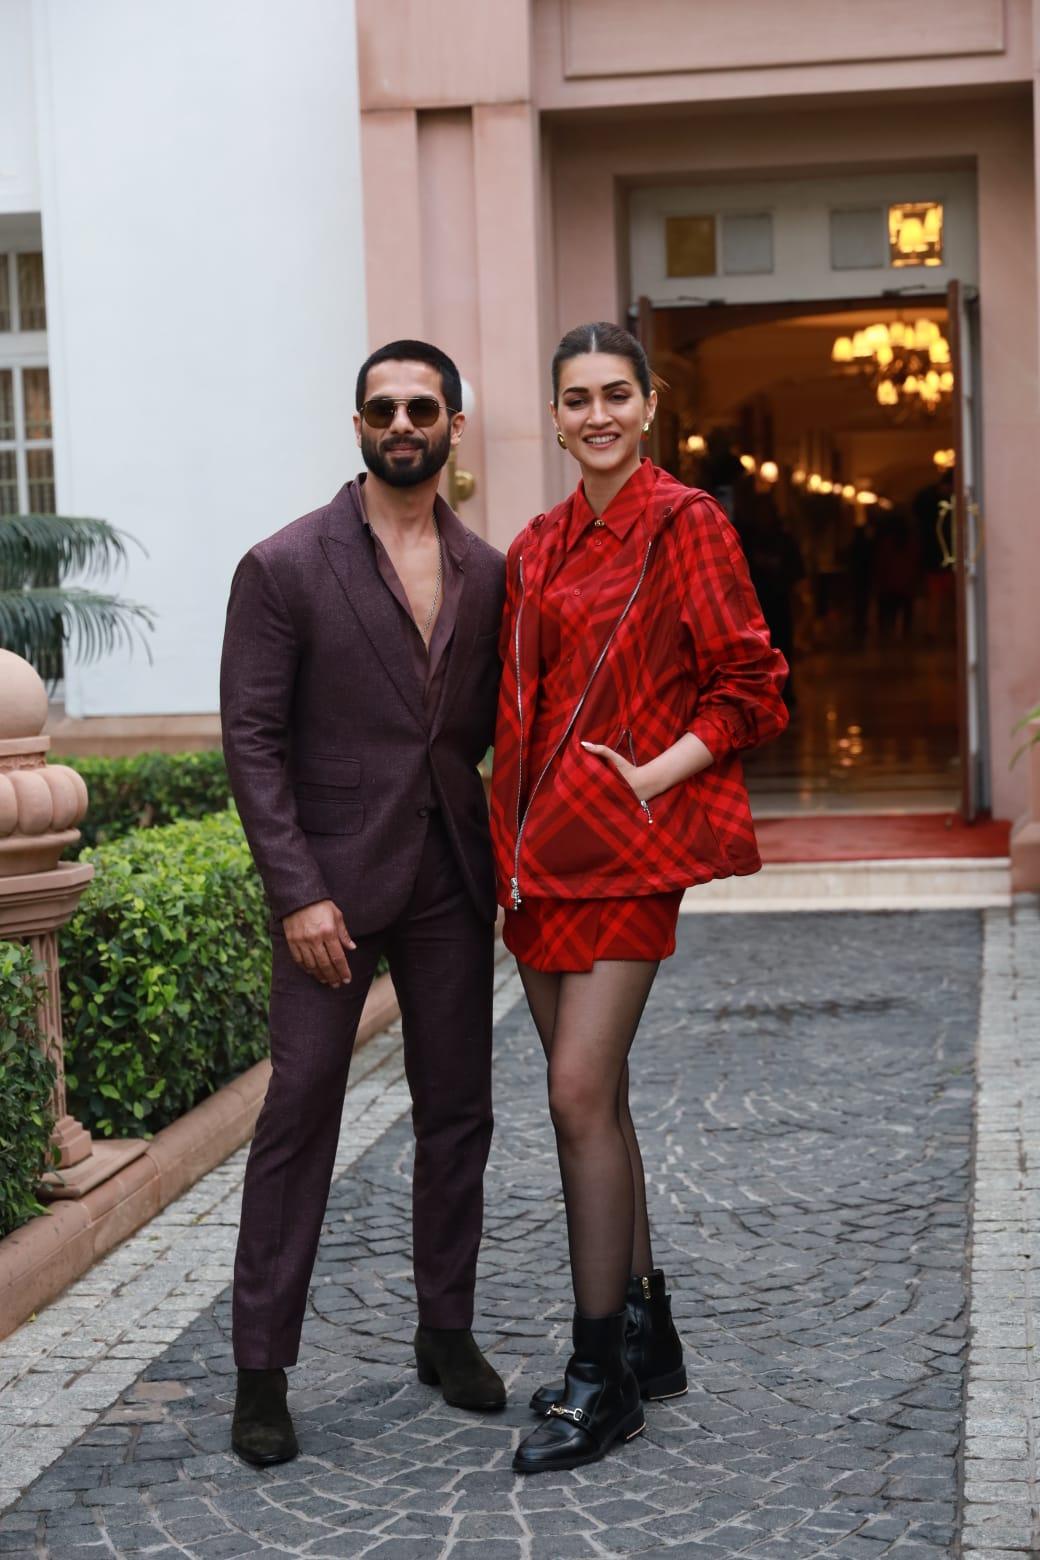 Shahid Kapoor wore a chocolate brown suit as he was spotted alongside Kriti Sanon